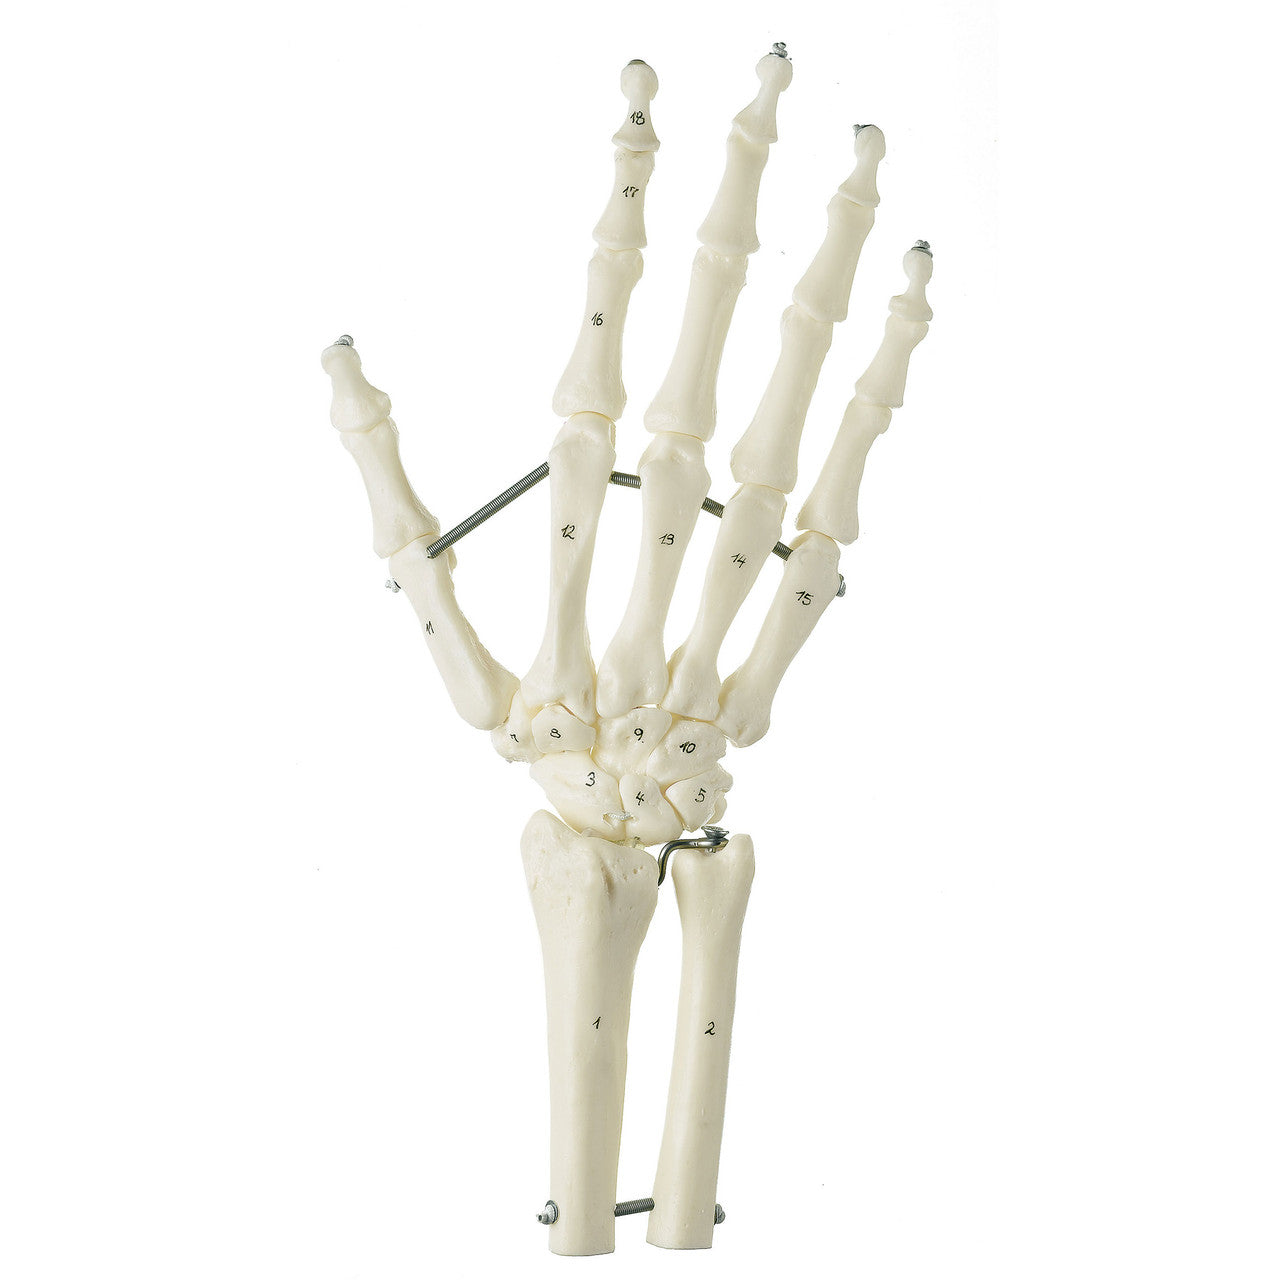 Skeleton of the Hand with Base of Forearm Somso Qs 31/7